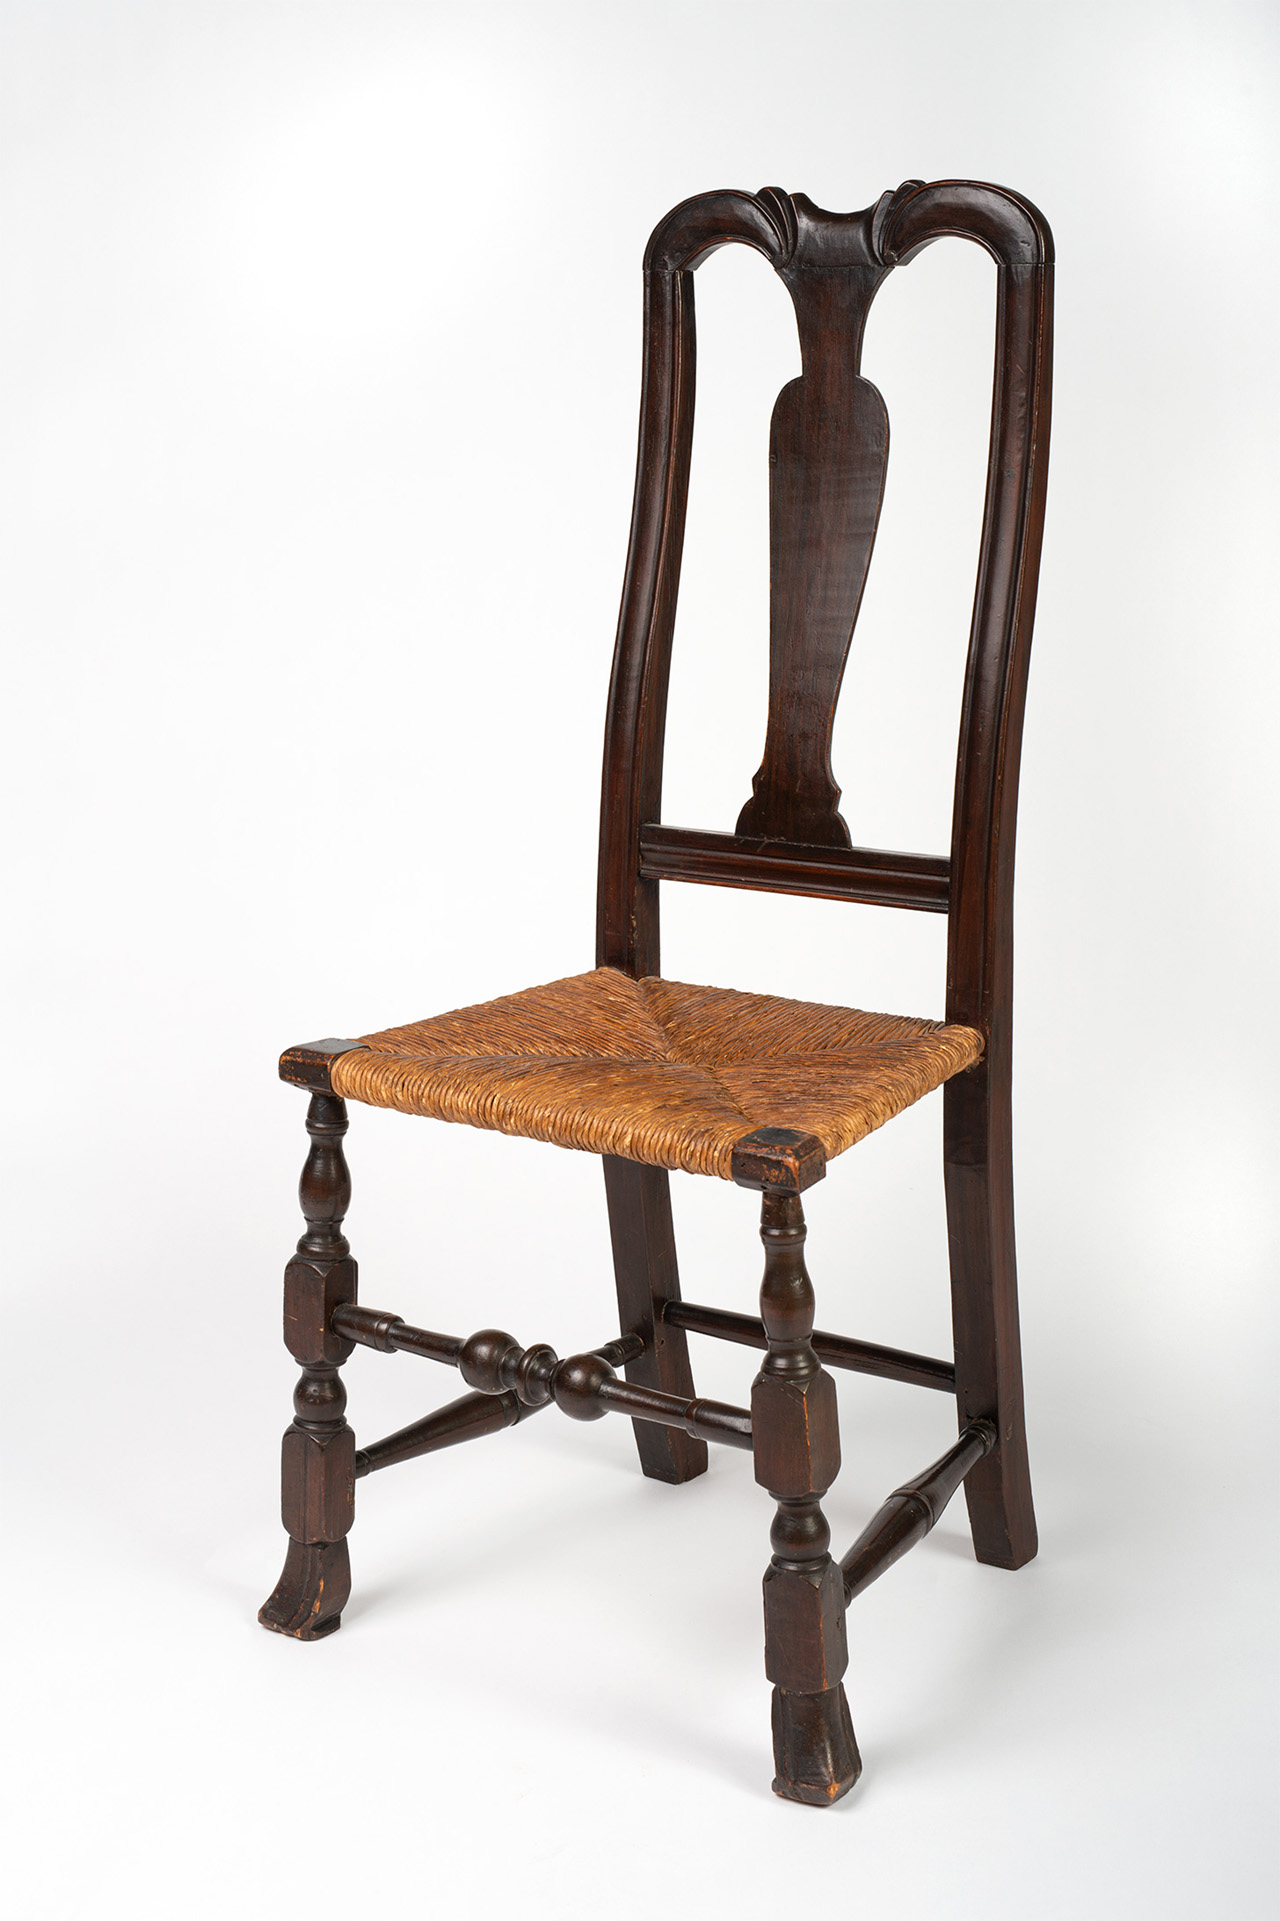 A very fine early Queen Anne sidechair